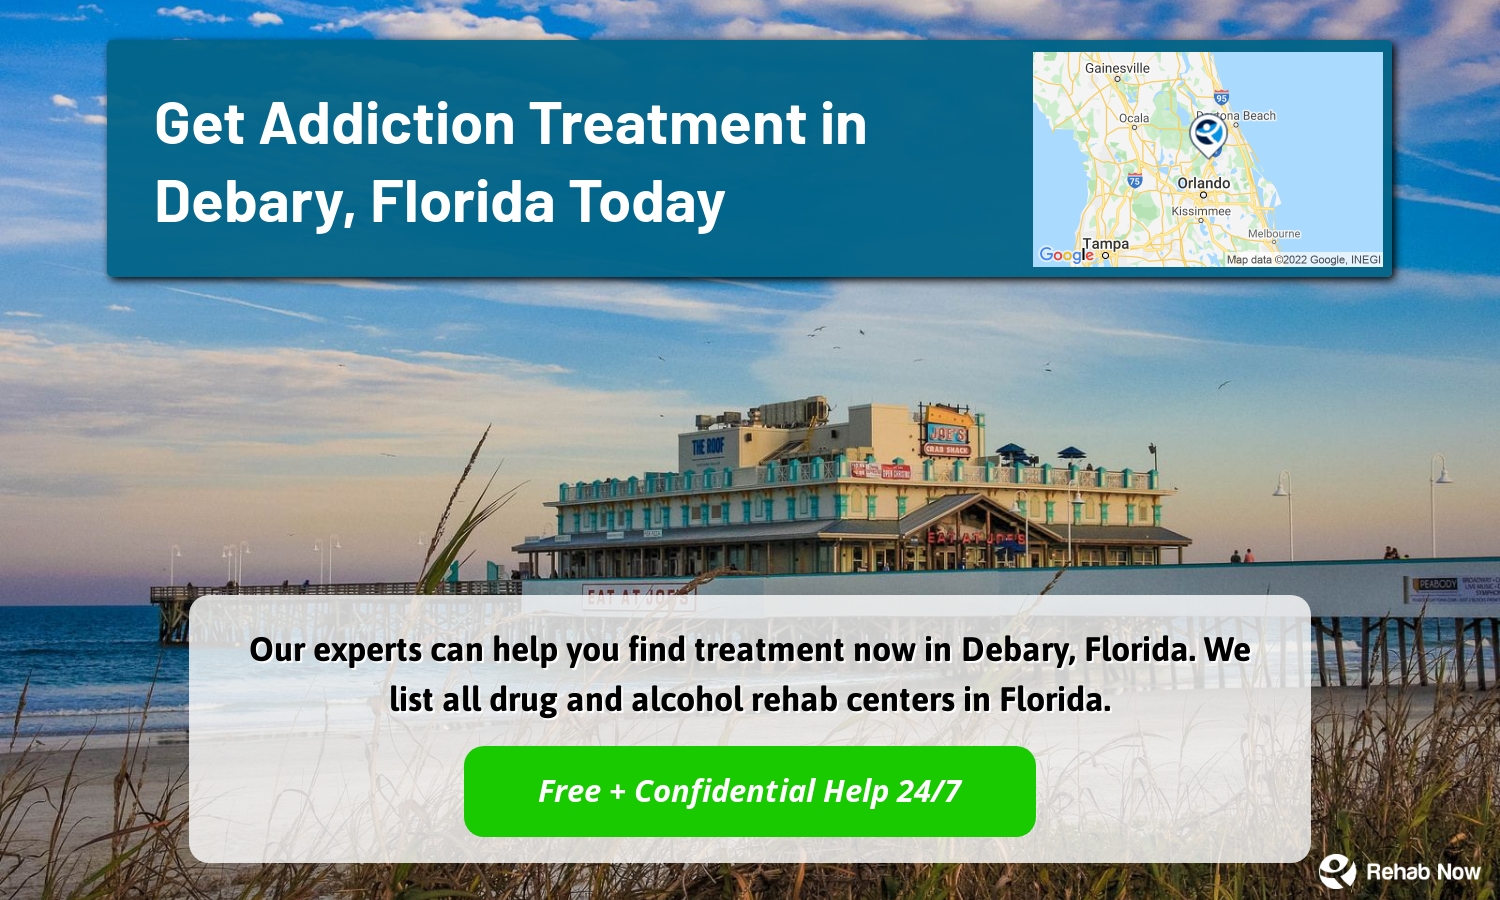 Our experts can help you find treatment now in Debary, Florida. We list all drug and alcohol rehab centers in Florida.